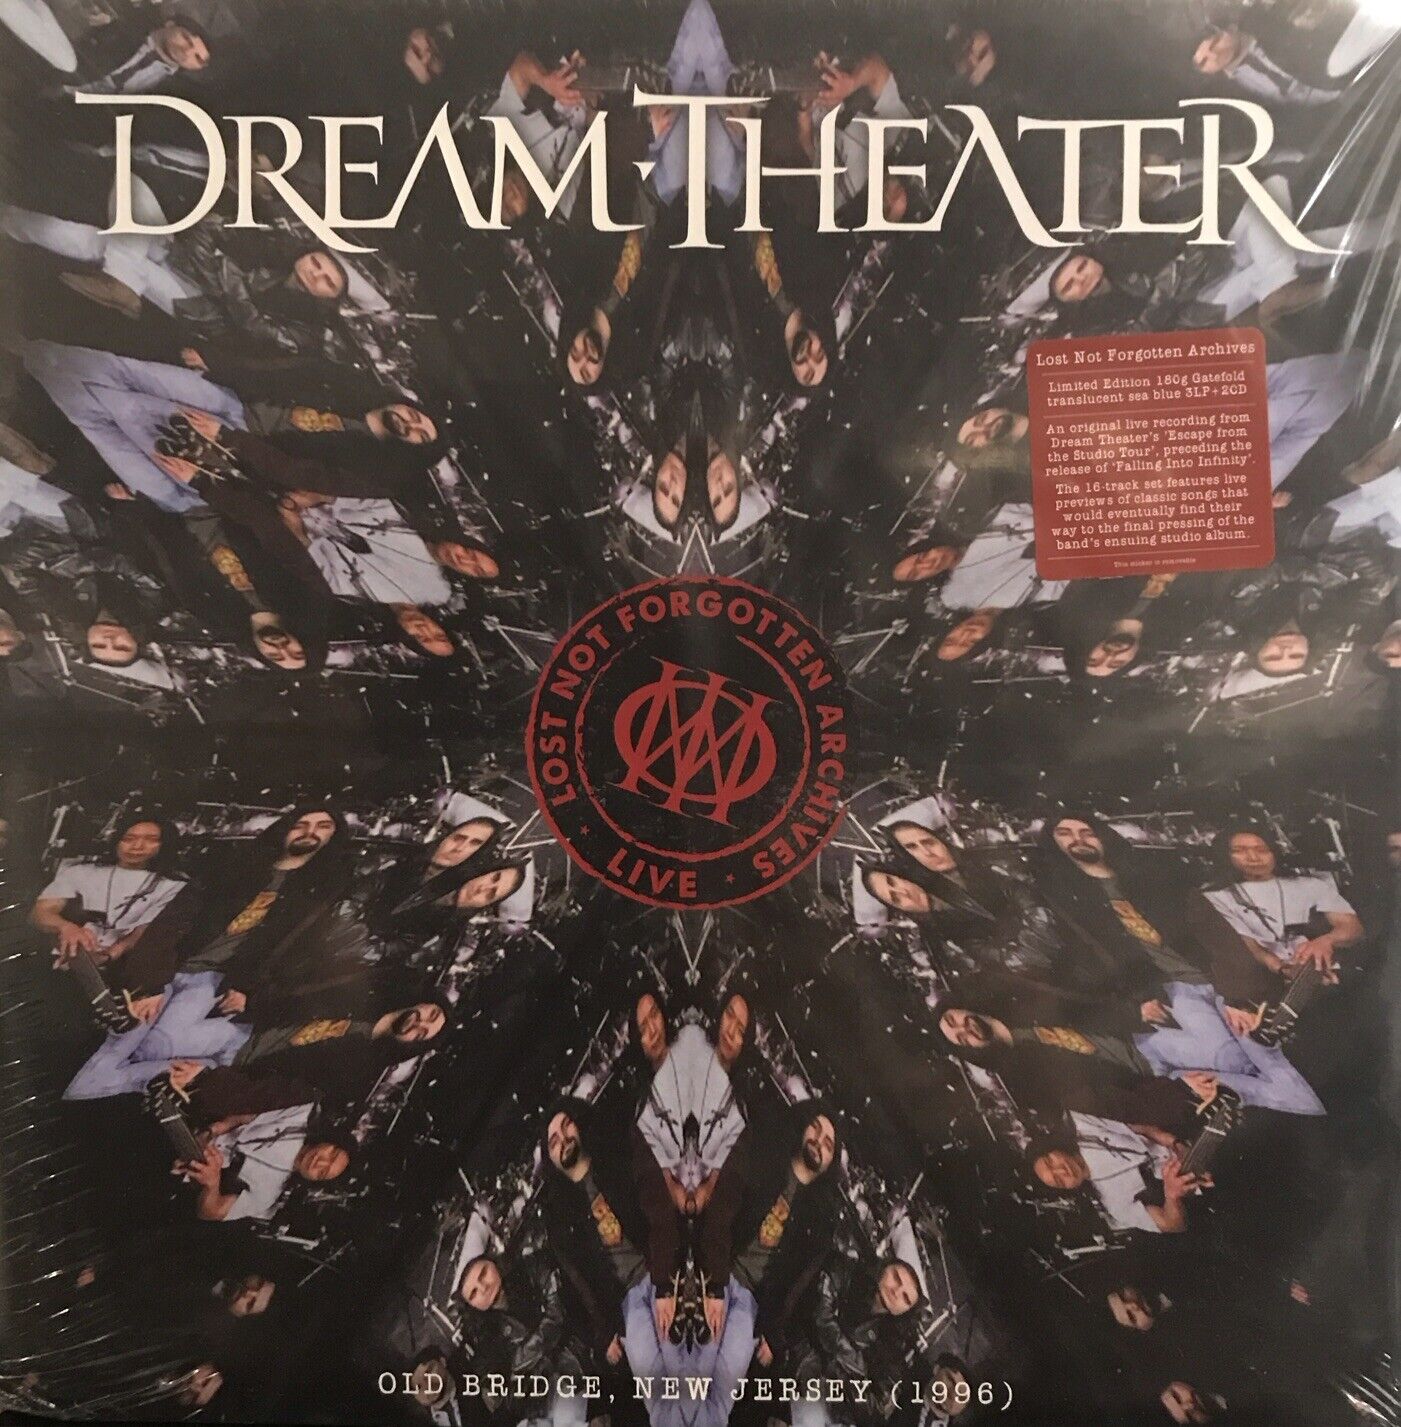 Dream Theater – Old Bridge, New Jersey LP 1996 Inside Out [Blue] [Sealed] w/ CDs